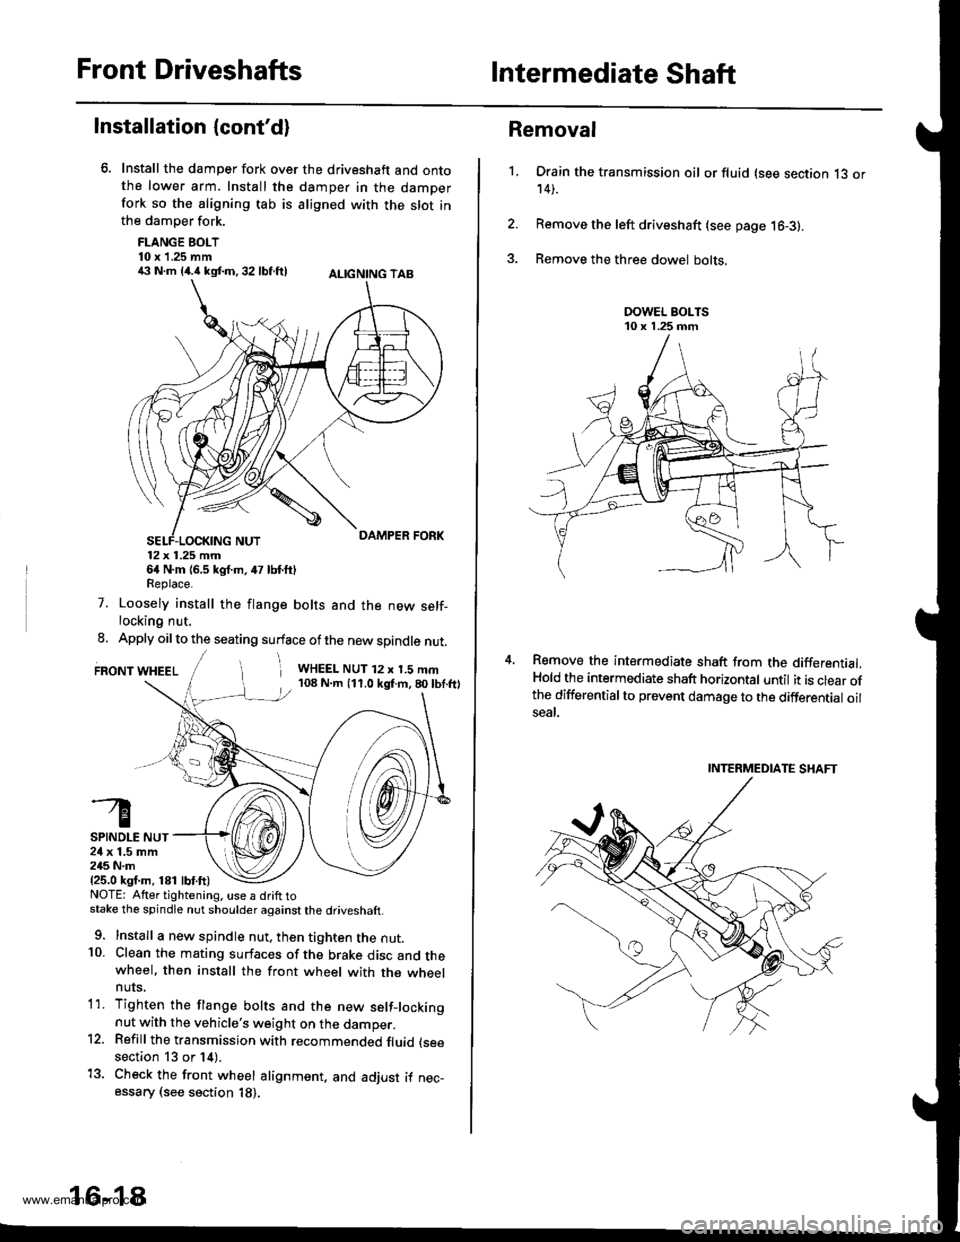 HONDA CR-V 2000 RD1-RD3 / 1.G Workshop Manual 
Front DriveshaftsIntermediate Shaft
Installation {contd}
Install the damper fork over the driveshaft and ontothe lower arm. Install the damper in the damperfork so the aligning tab is aligned with t